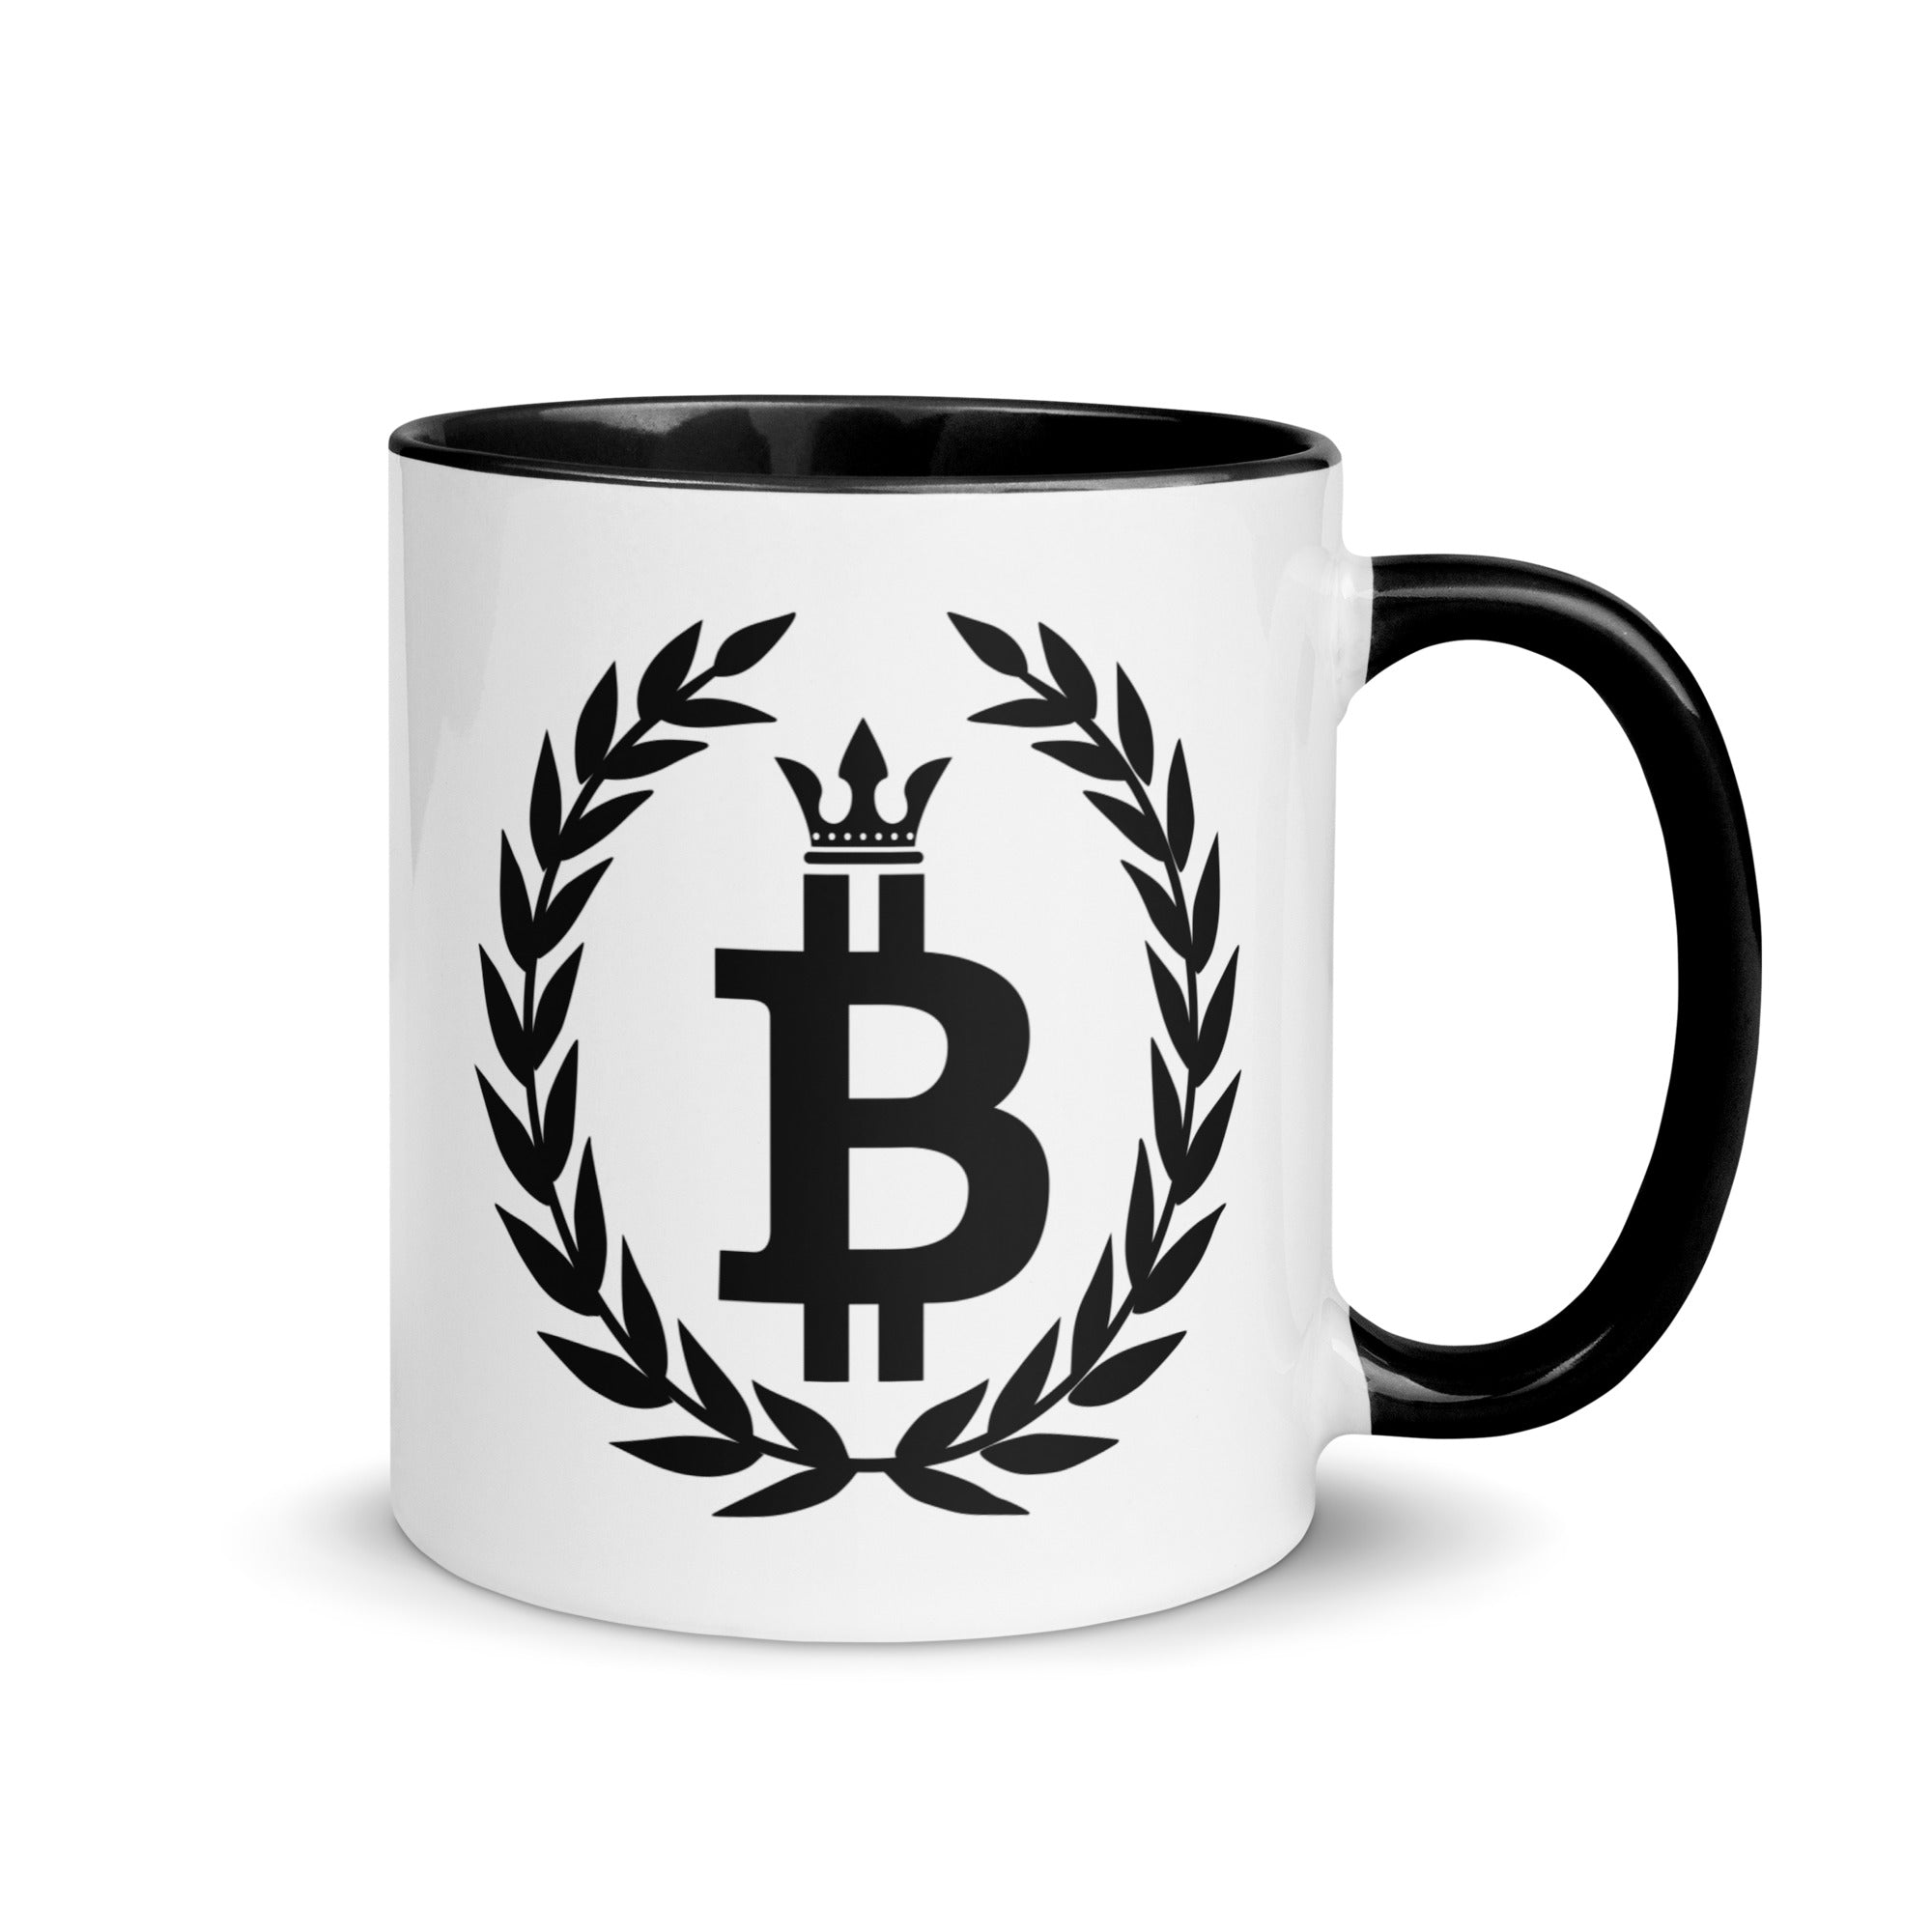 Bitcoin Mug - Our Bitcoin Dominance Mug features an epic Bitcoin design and makes a great gift for Bitcoin enthusiasts. Right handle view. 